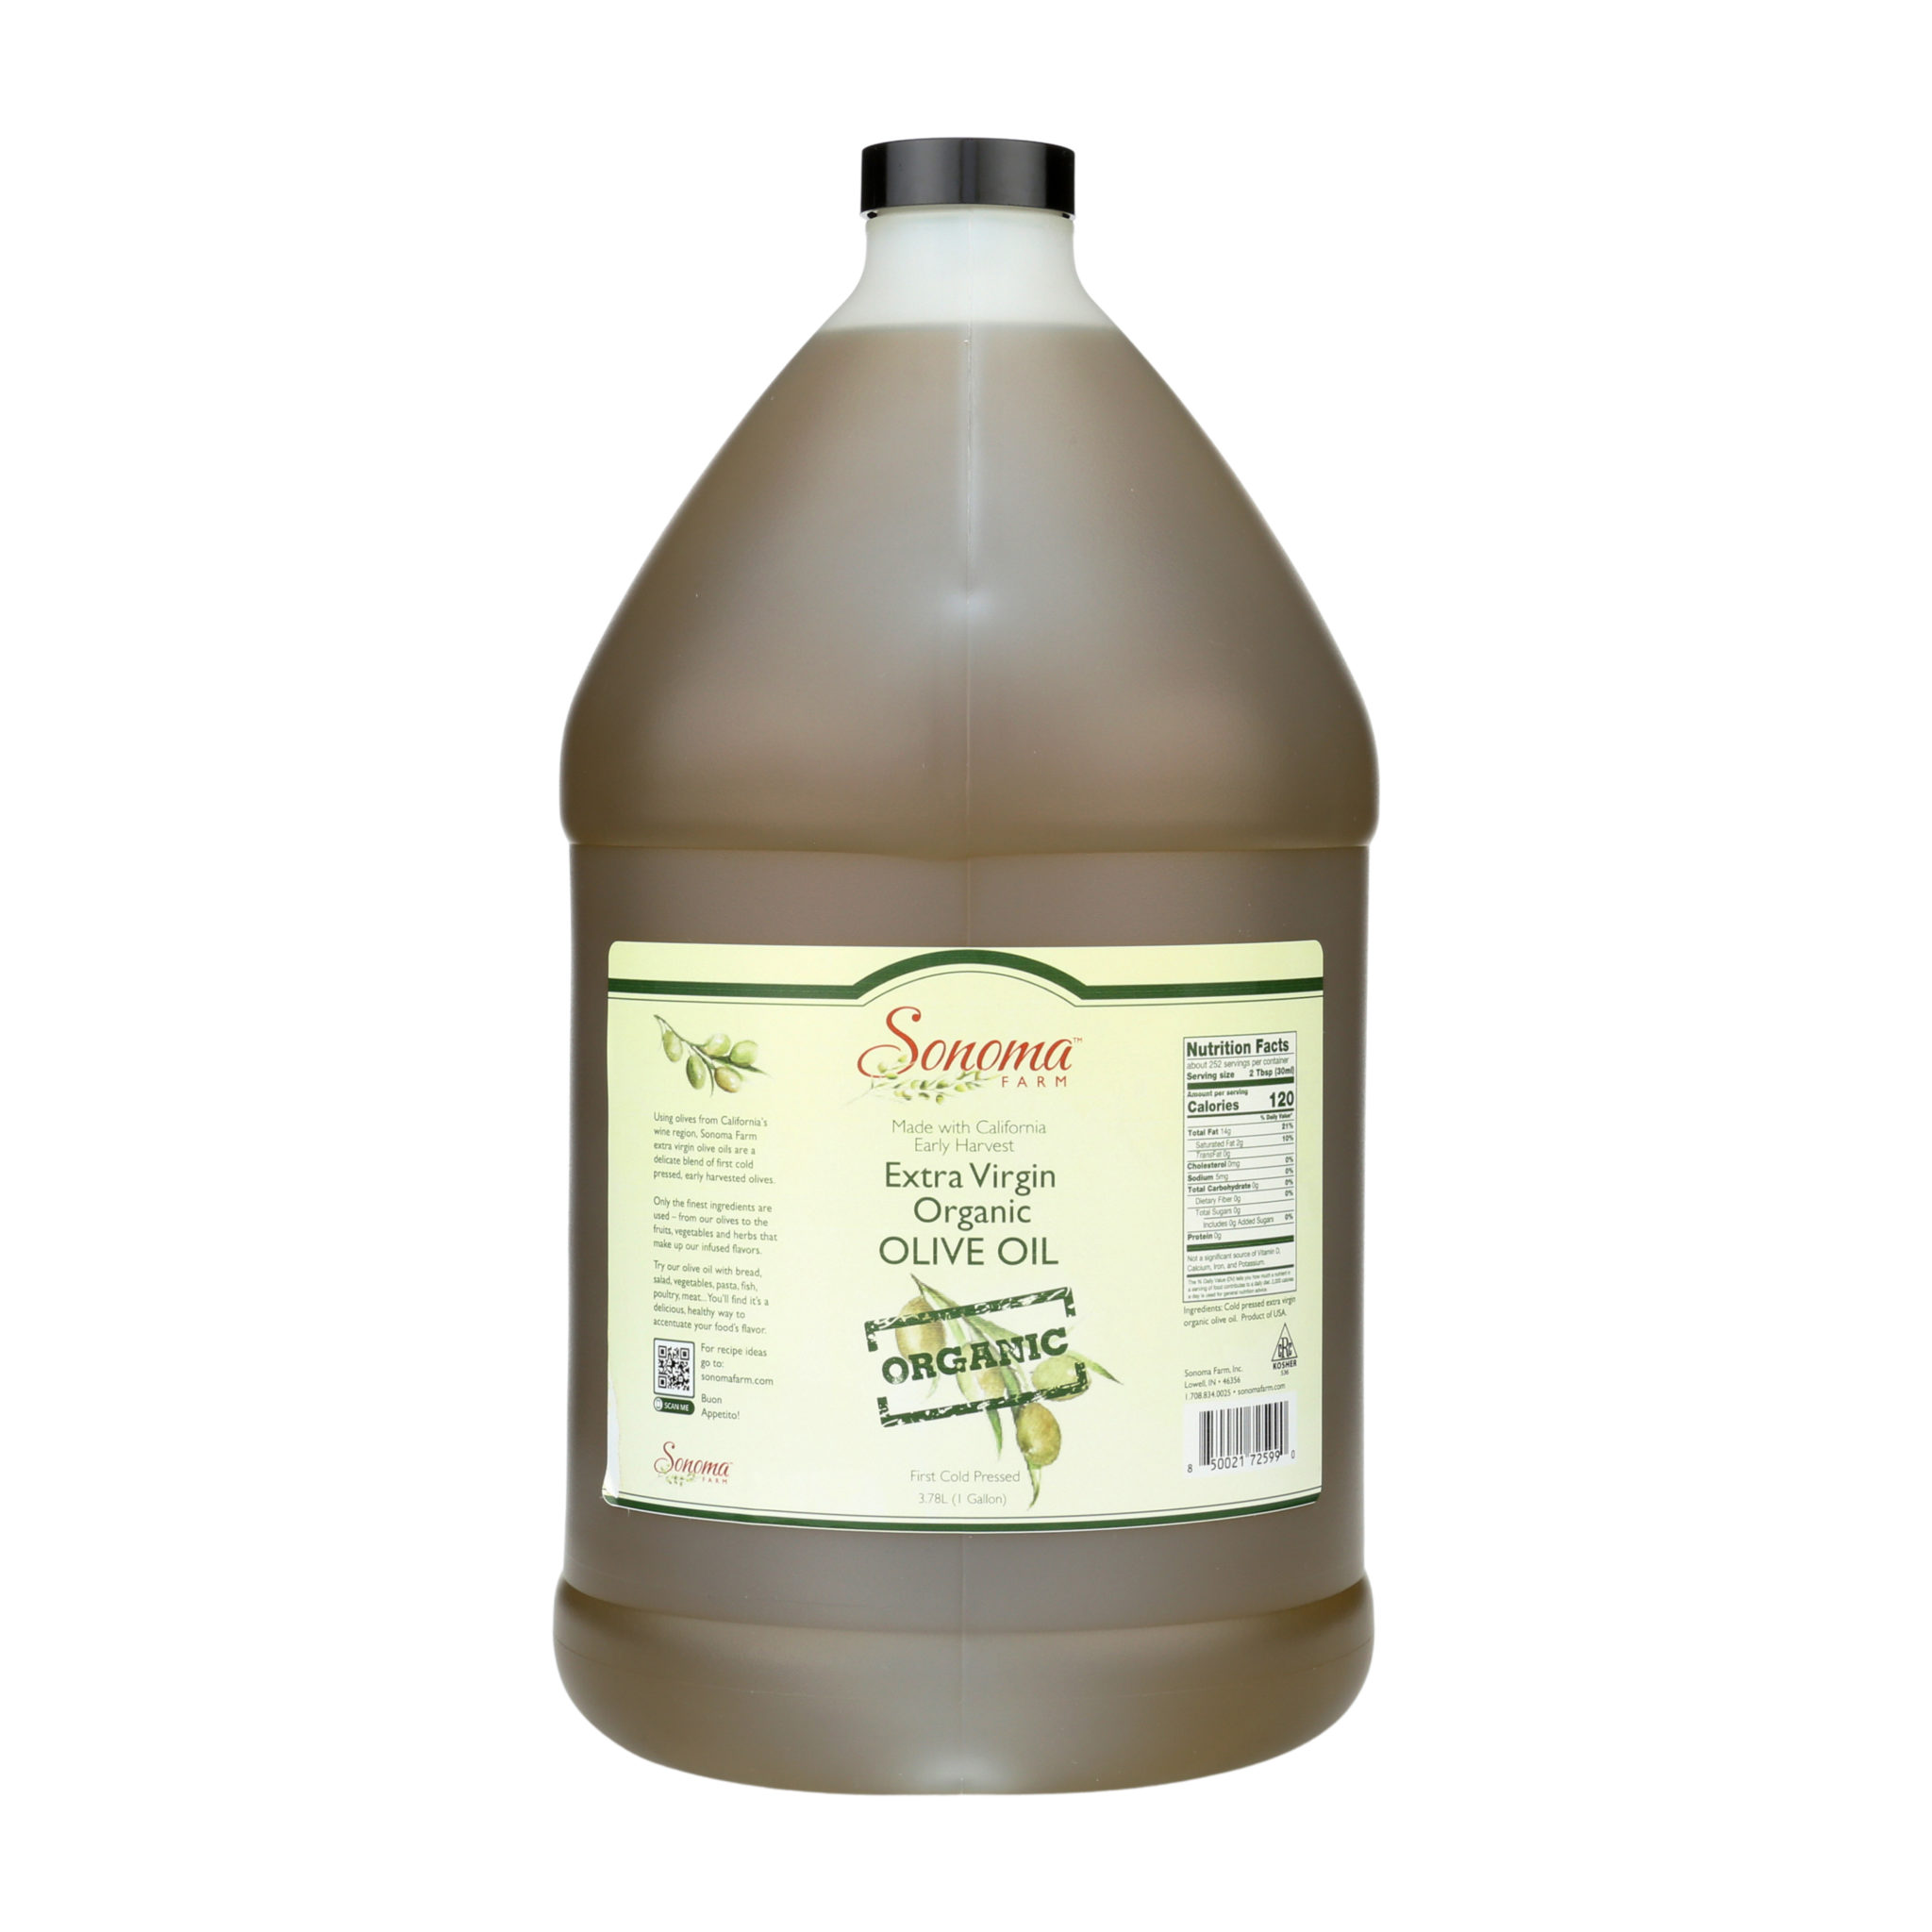 Buy Bragg's Olive Oil Organic - 1 gallon, Health Foods Stores